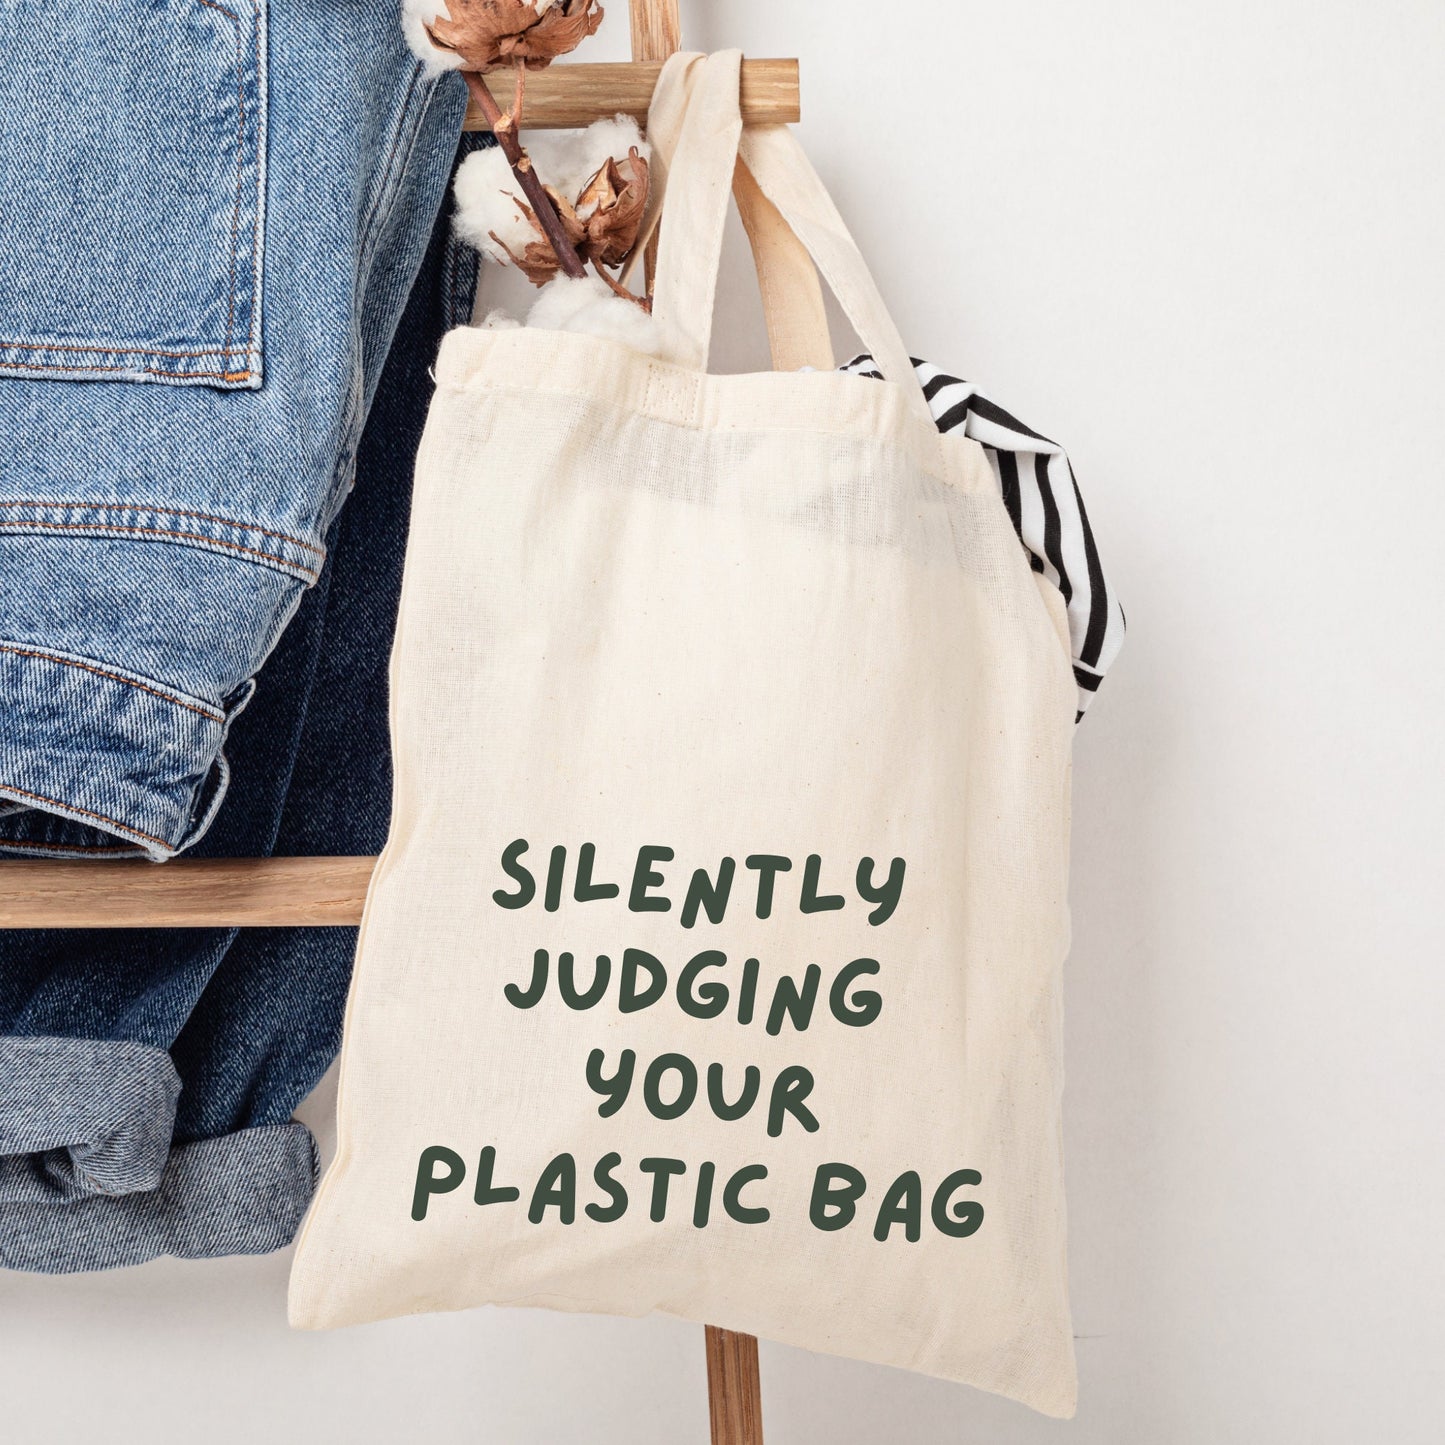 Silently judging your plastic bag, joke novelty funny tote bag, eco friendly shopping bag, stocking fillers, Christmas gift